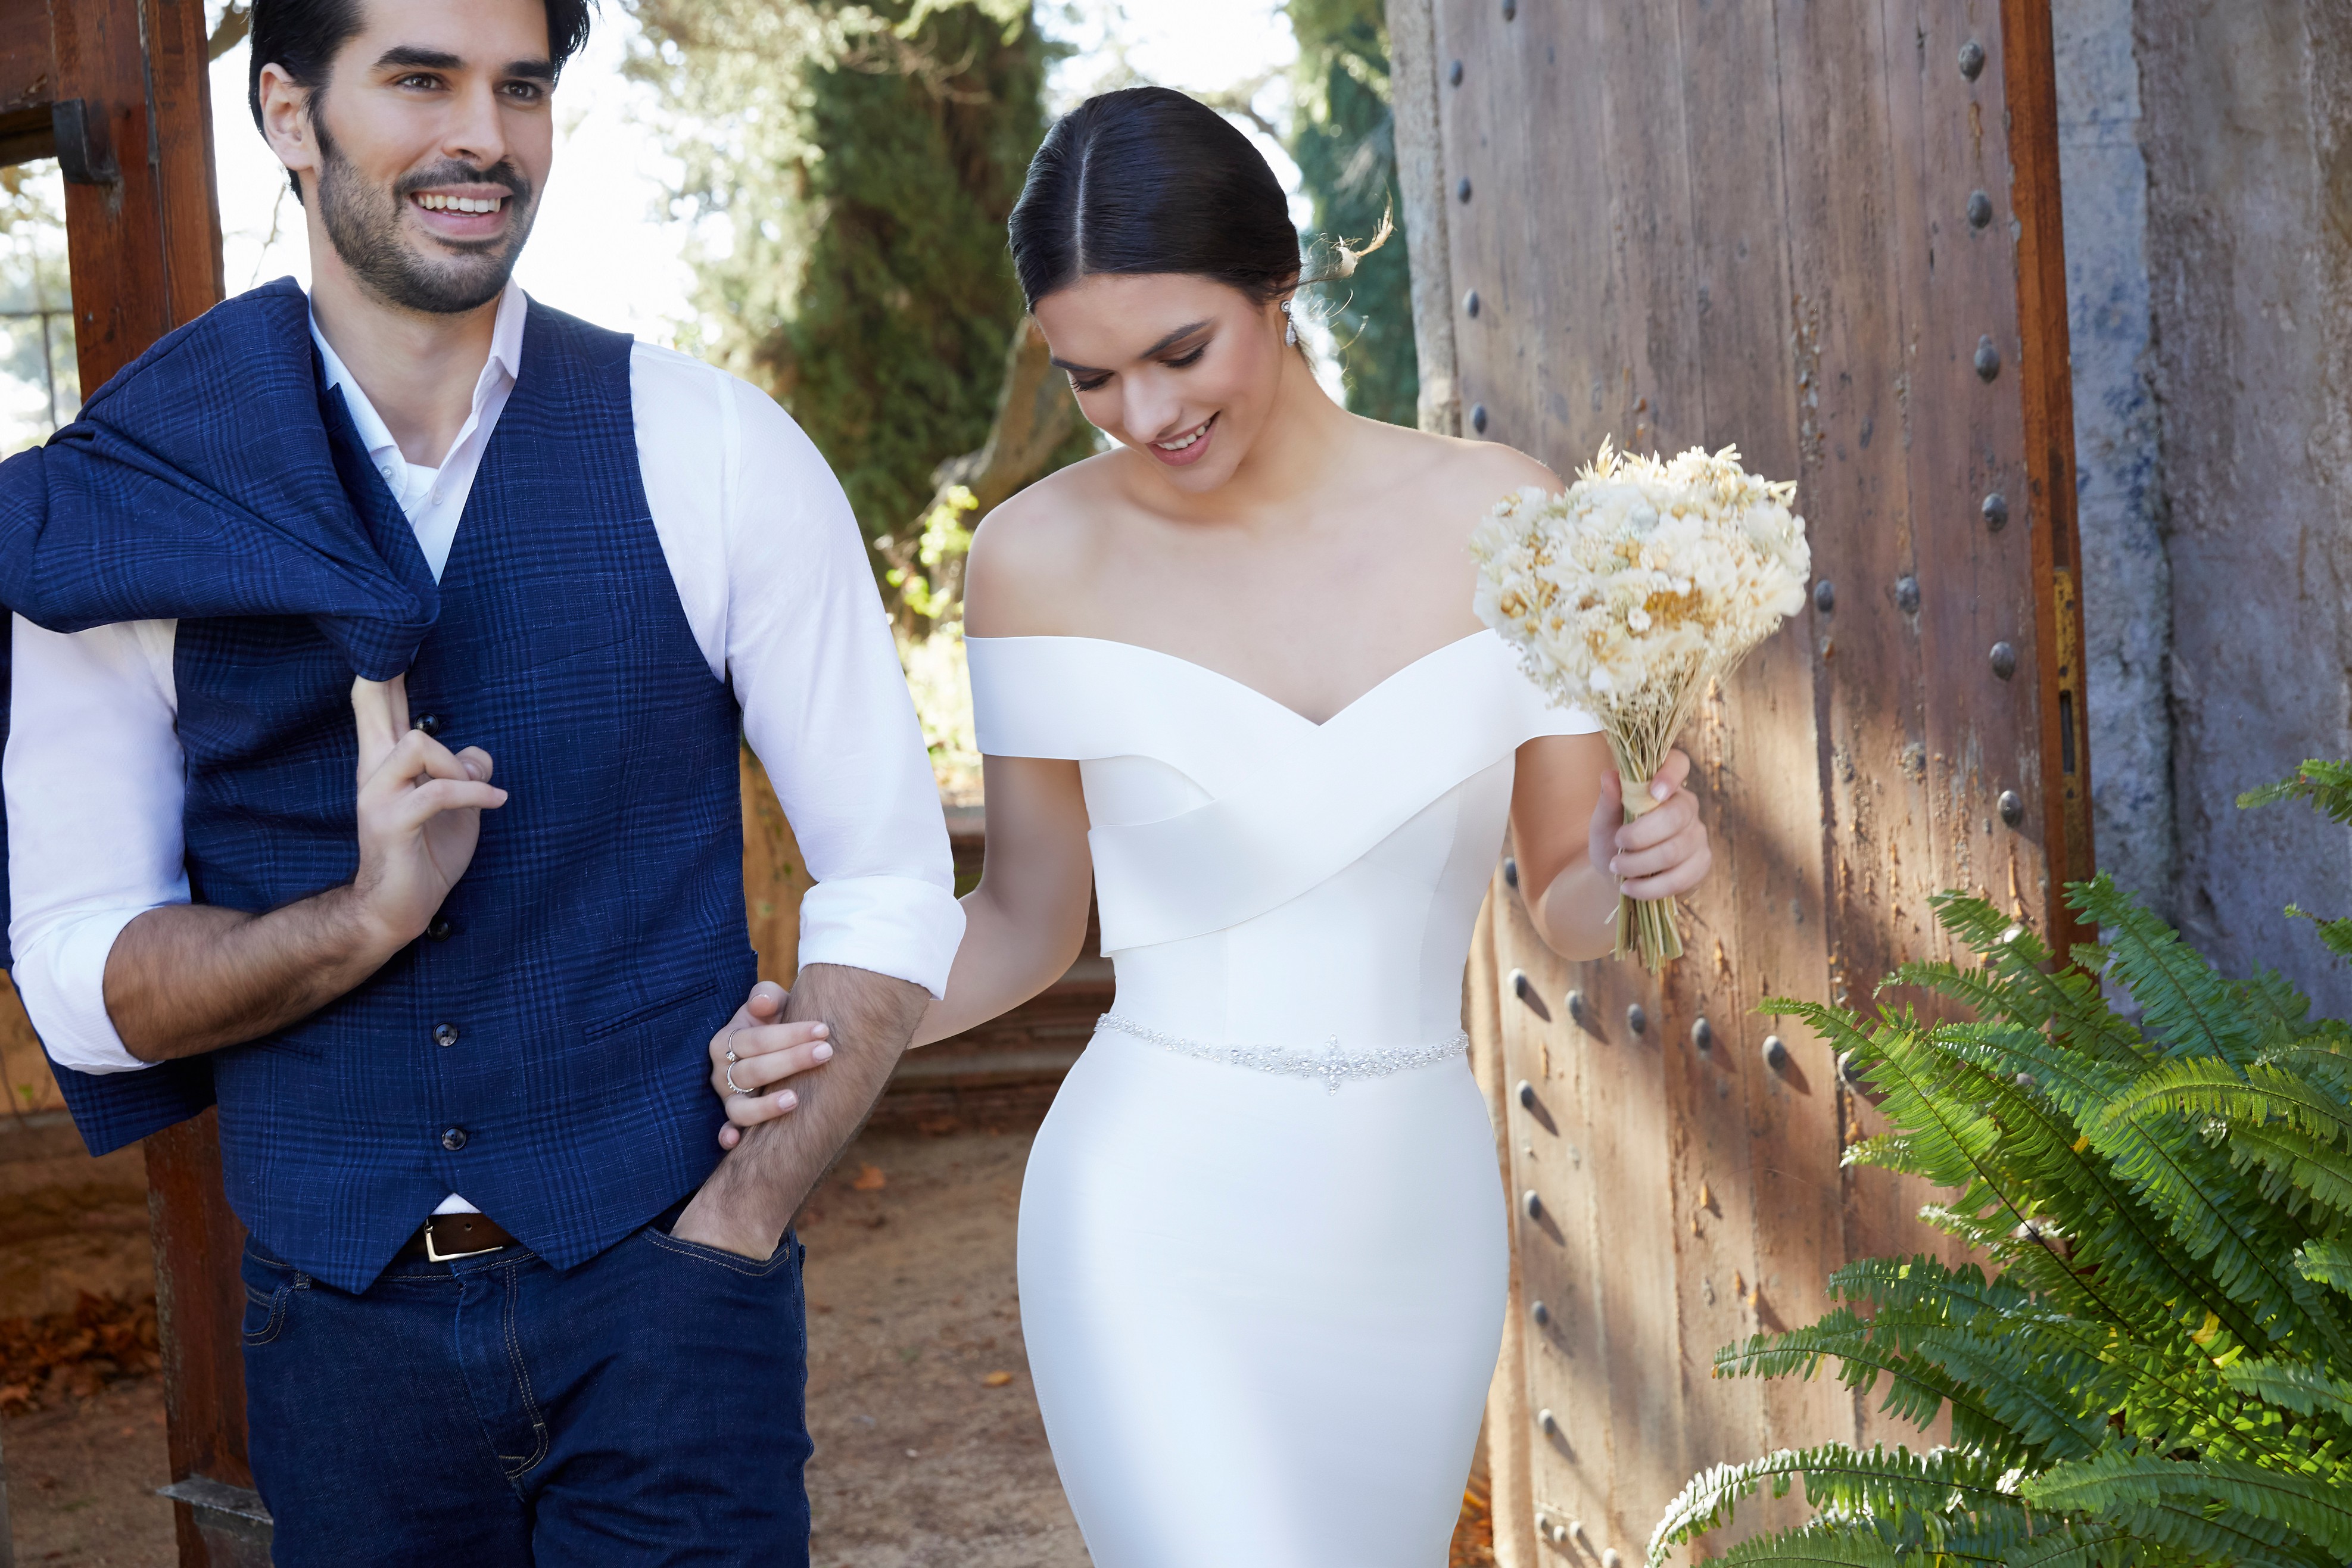 Model and groom stood arm in arm by a gate. Model wears a bardot wedding dress (Ronald Joyce 18452), an off the shoulder plain Mikado fit and flare dress in ivory with a sparkle belt.